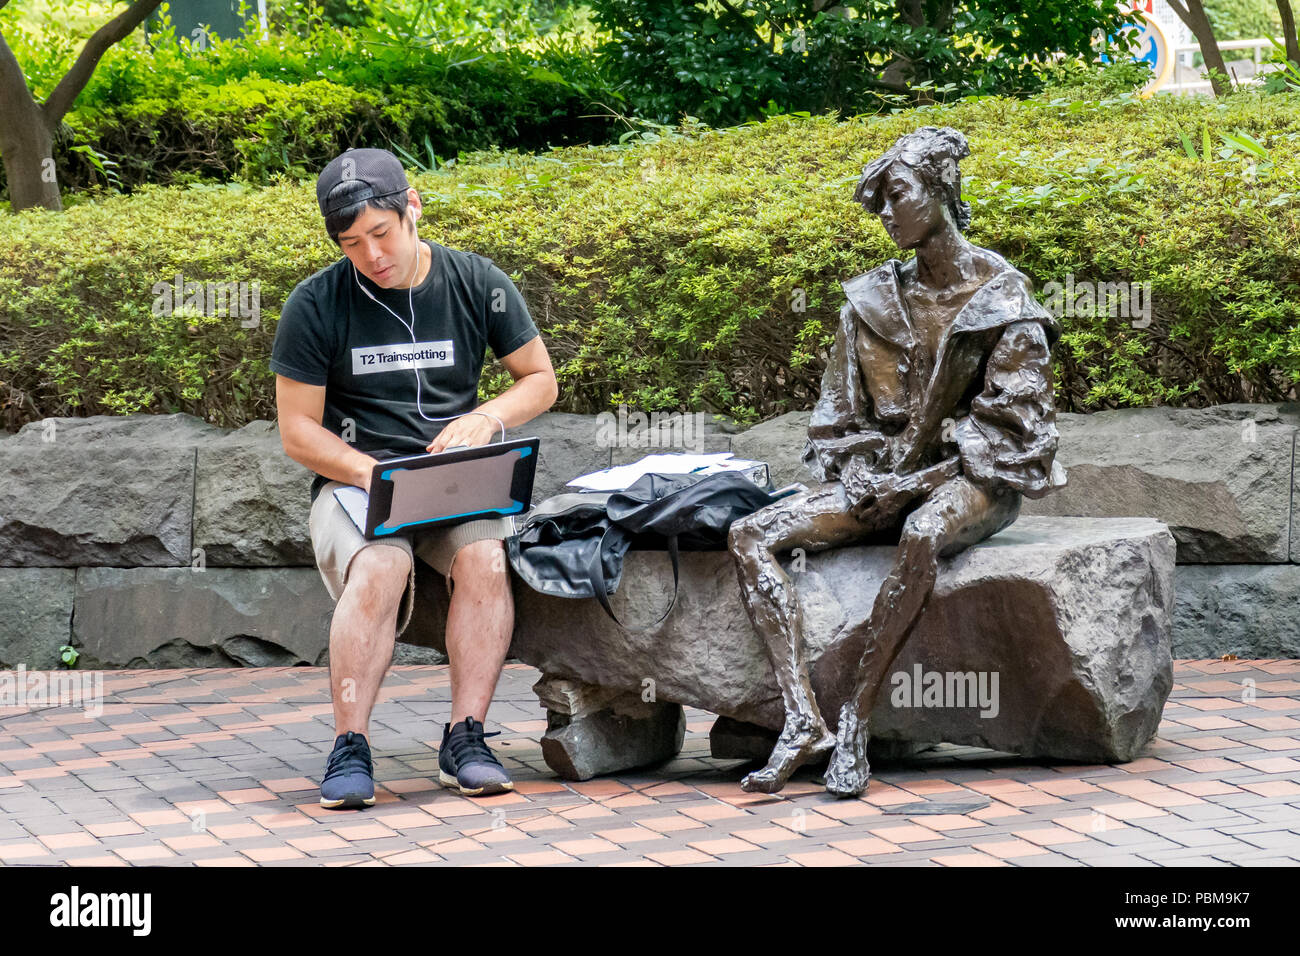 Bronze statue of Japanese lady looks over the shoulder of a young Japanese man working on his laptop, wearing baseball cap and white earphones Stock Photo